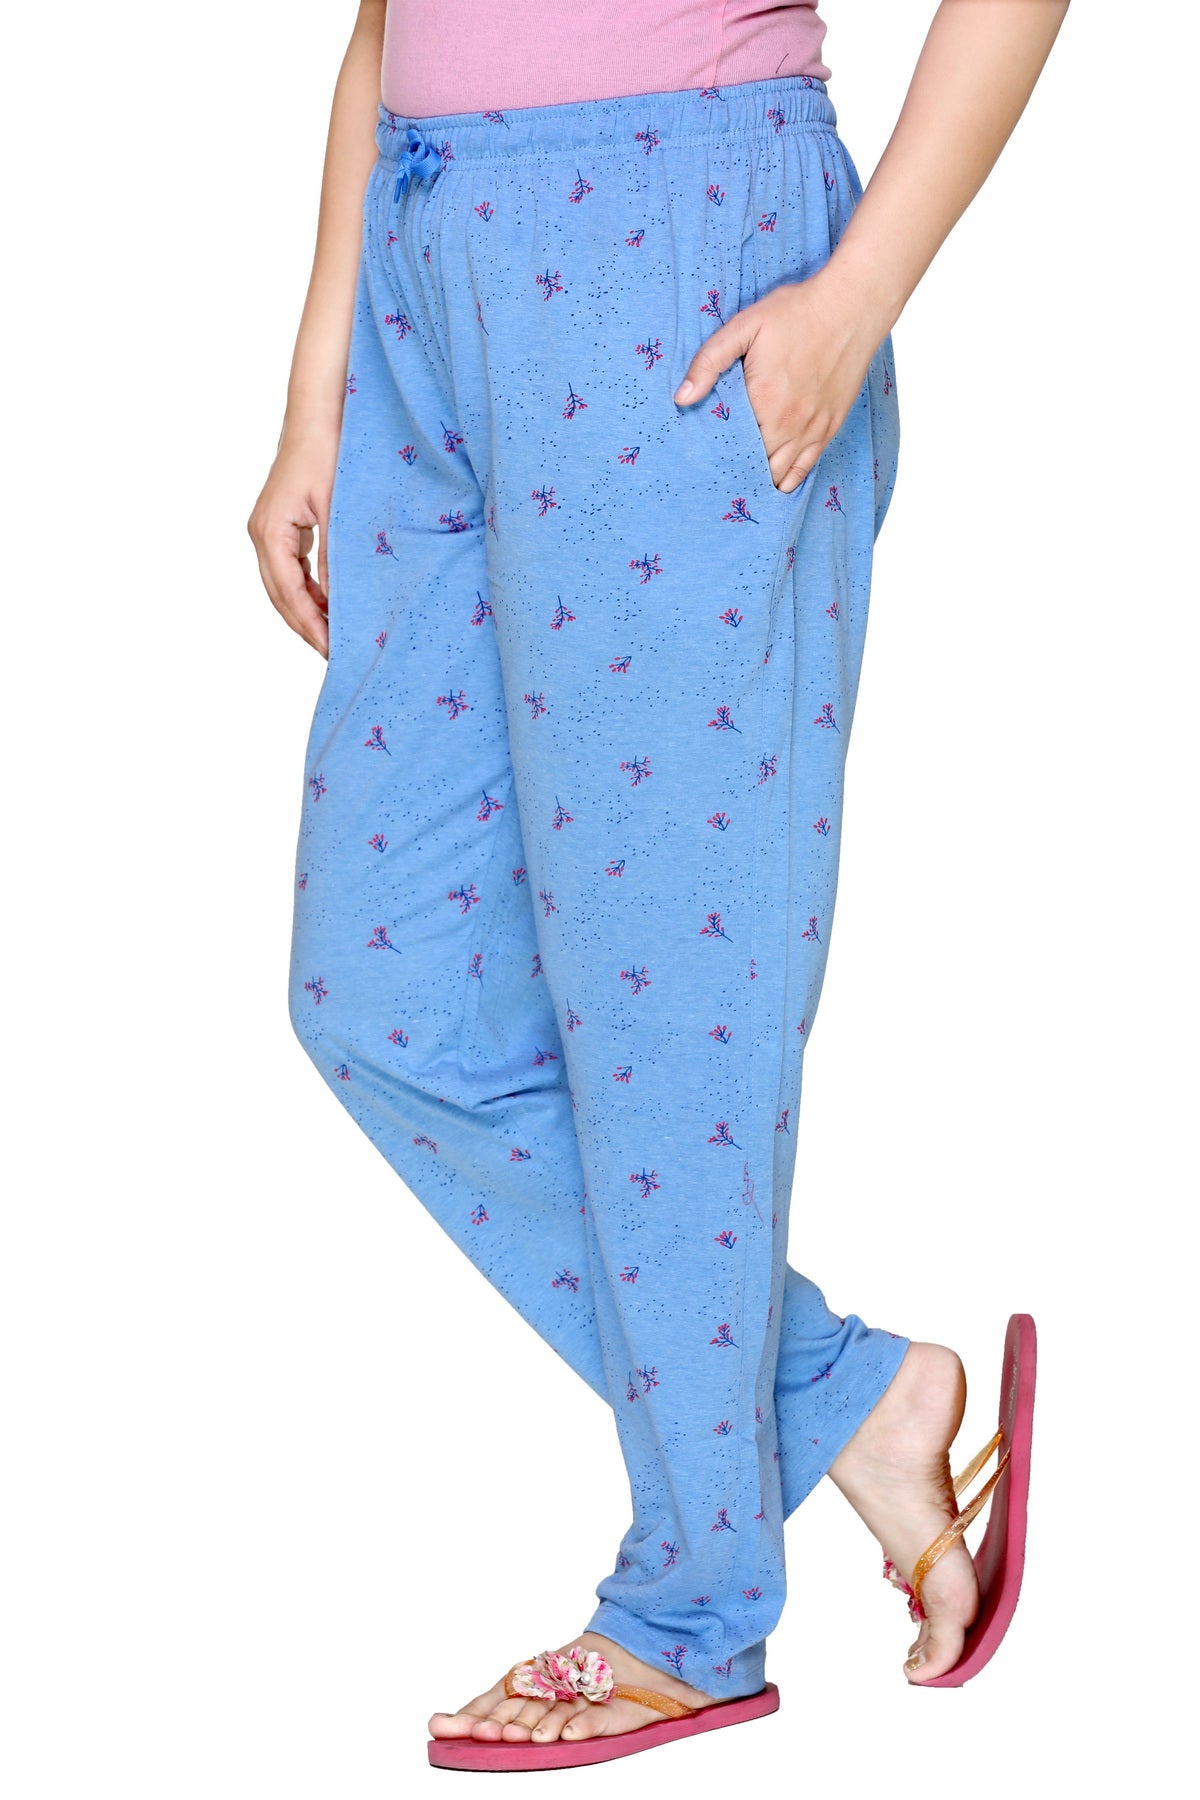 Cotton LADIES NIGHT SUITS, T-SHIRT WITH PANTS at Rs 260/piece in Bengaluru  | ID: 23917146673